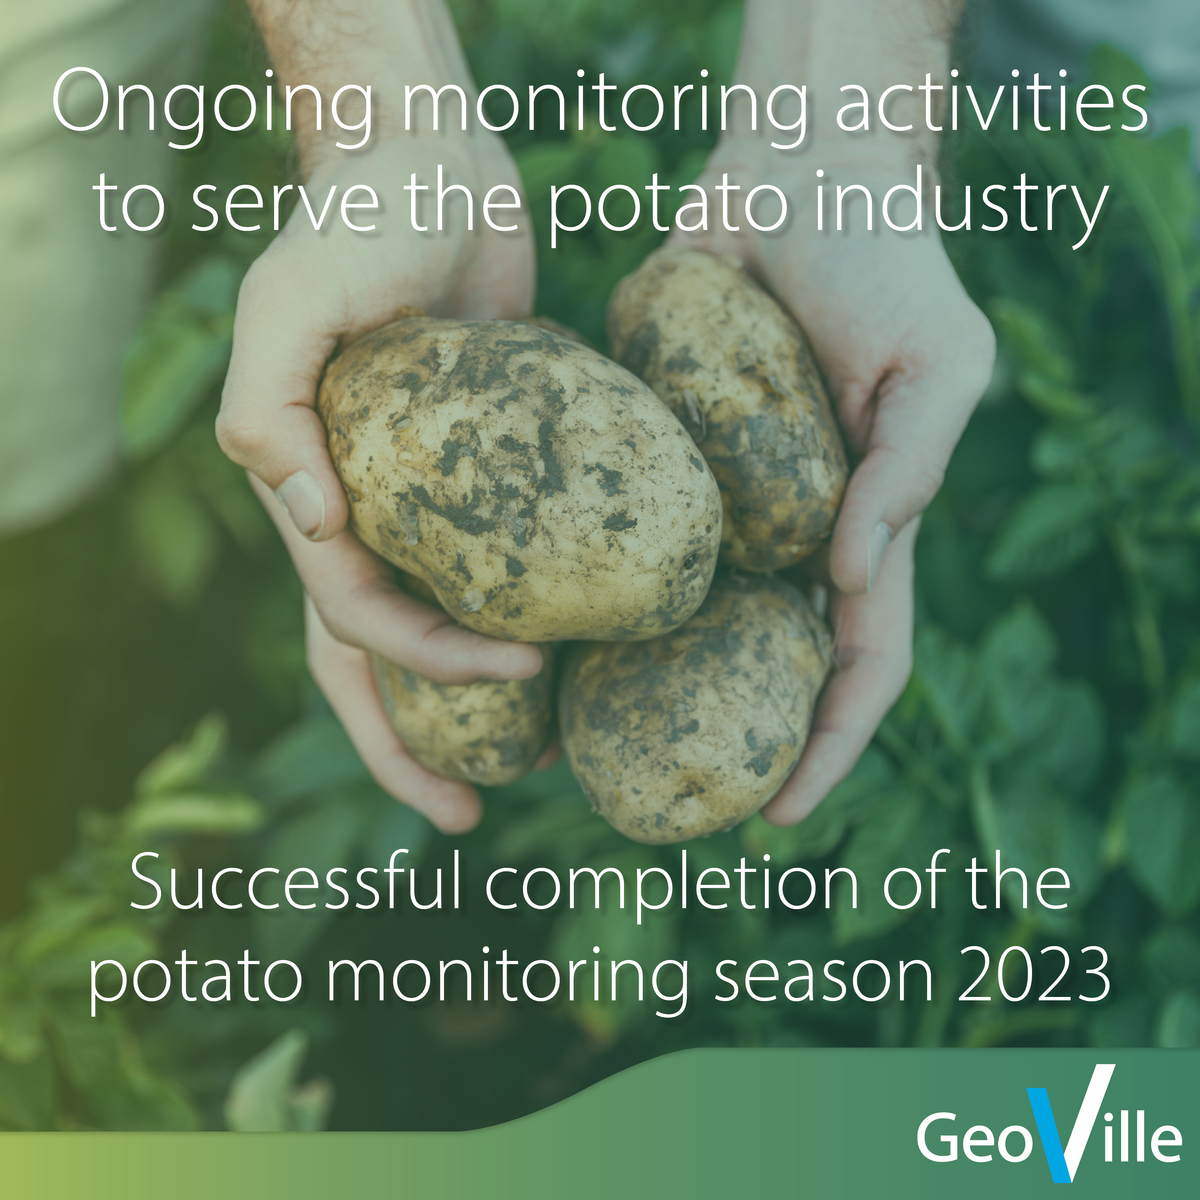 Ongoing monitoring acitvities to serve the potato industry